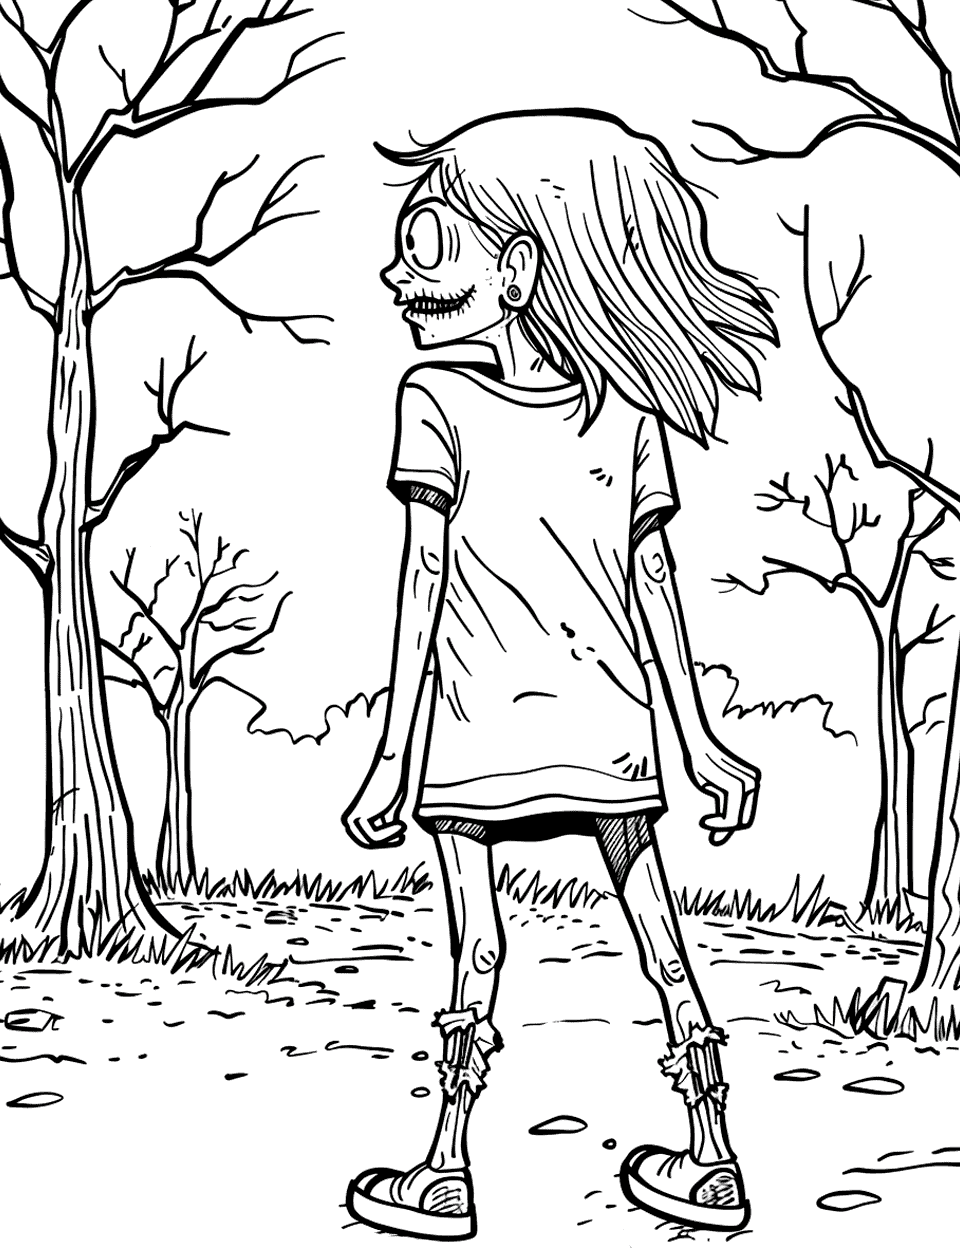 Zombie Girl in a Park Coloring Page - A zombie girl standing alone in an empty park with a few trees in the background.